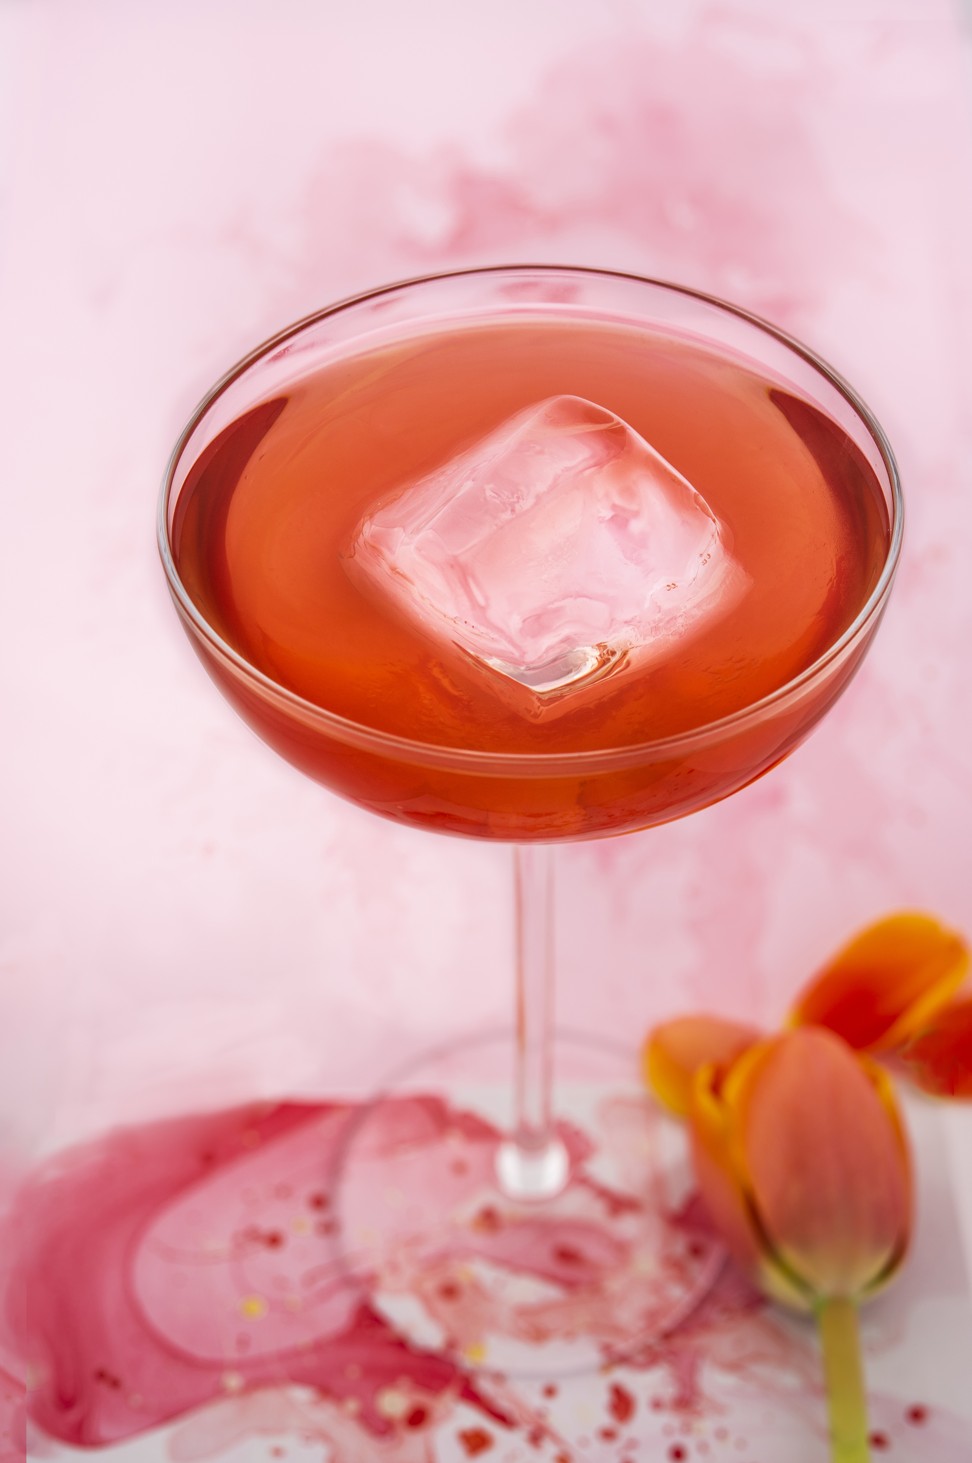 A cocktail created by Savage to evoke the moment ‘you fell in love’.